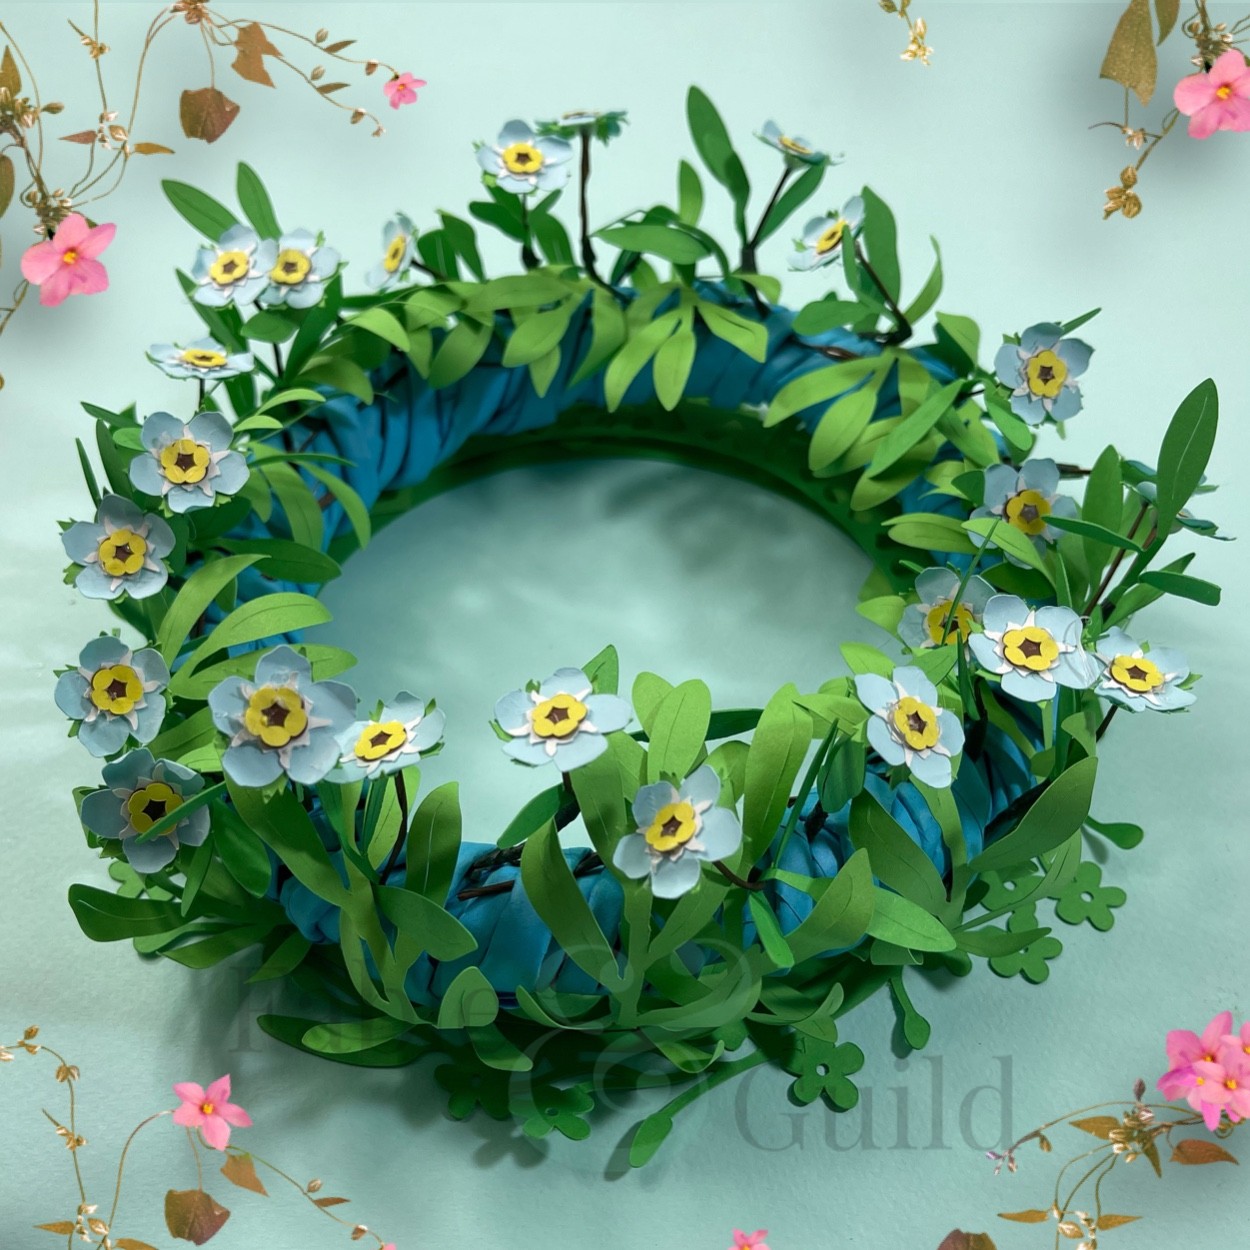 How to Make Quilling Paper Forget Me Nots